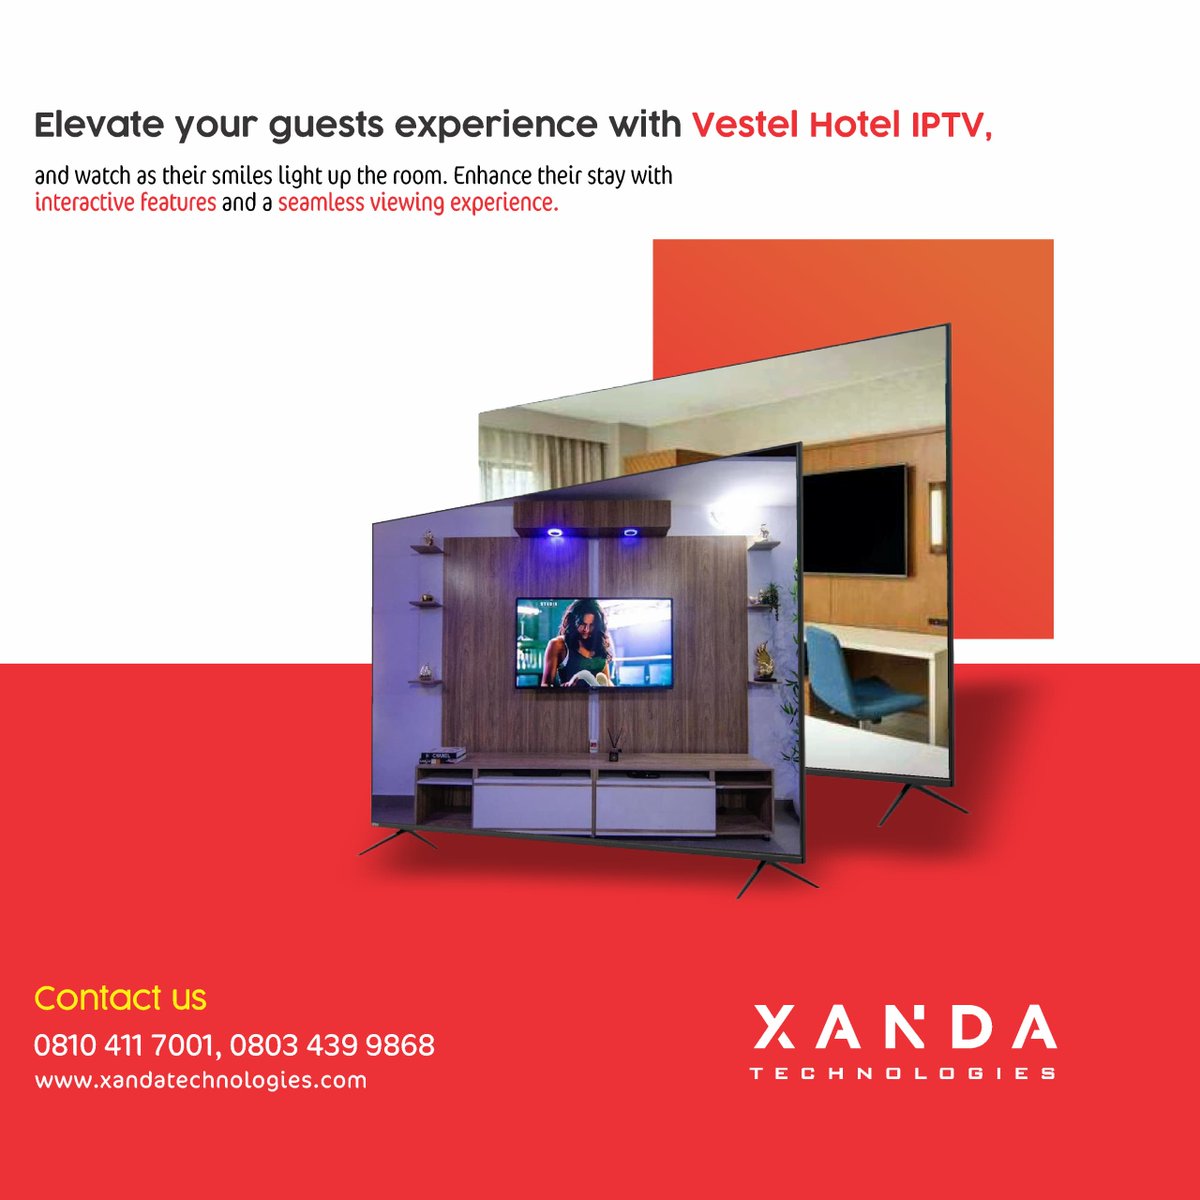 More than just TV, it's a guest engagement powerhouse! Reimagine the in-room experience with our cutting-edge hospitality TVs #weekendvibes #hospitalitytv #guestengagement #hotellife #xandatechnologies